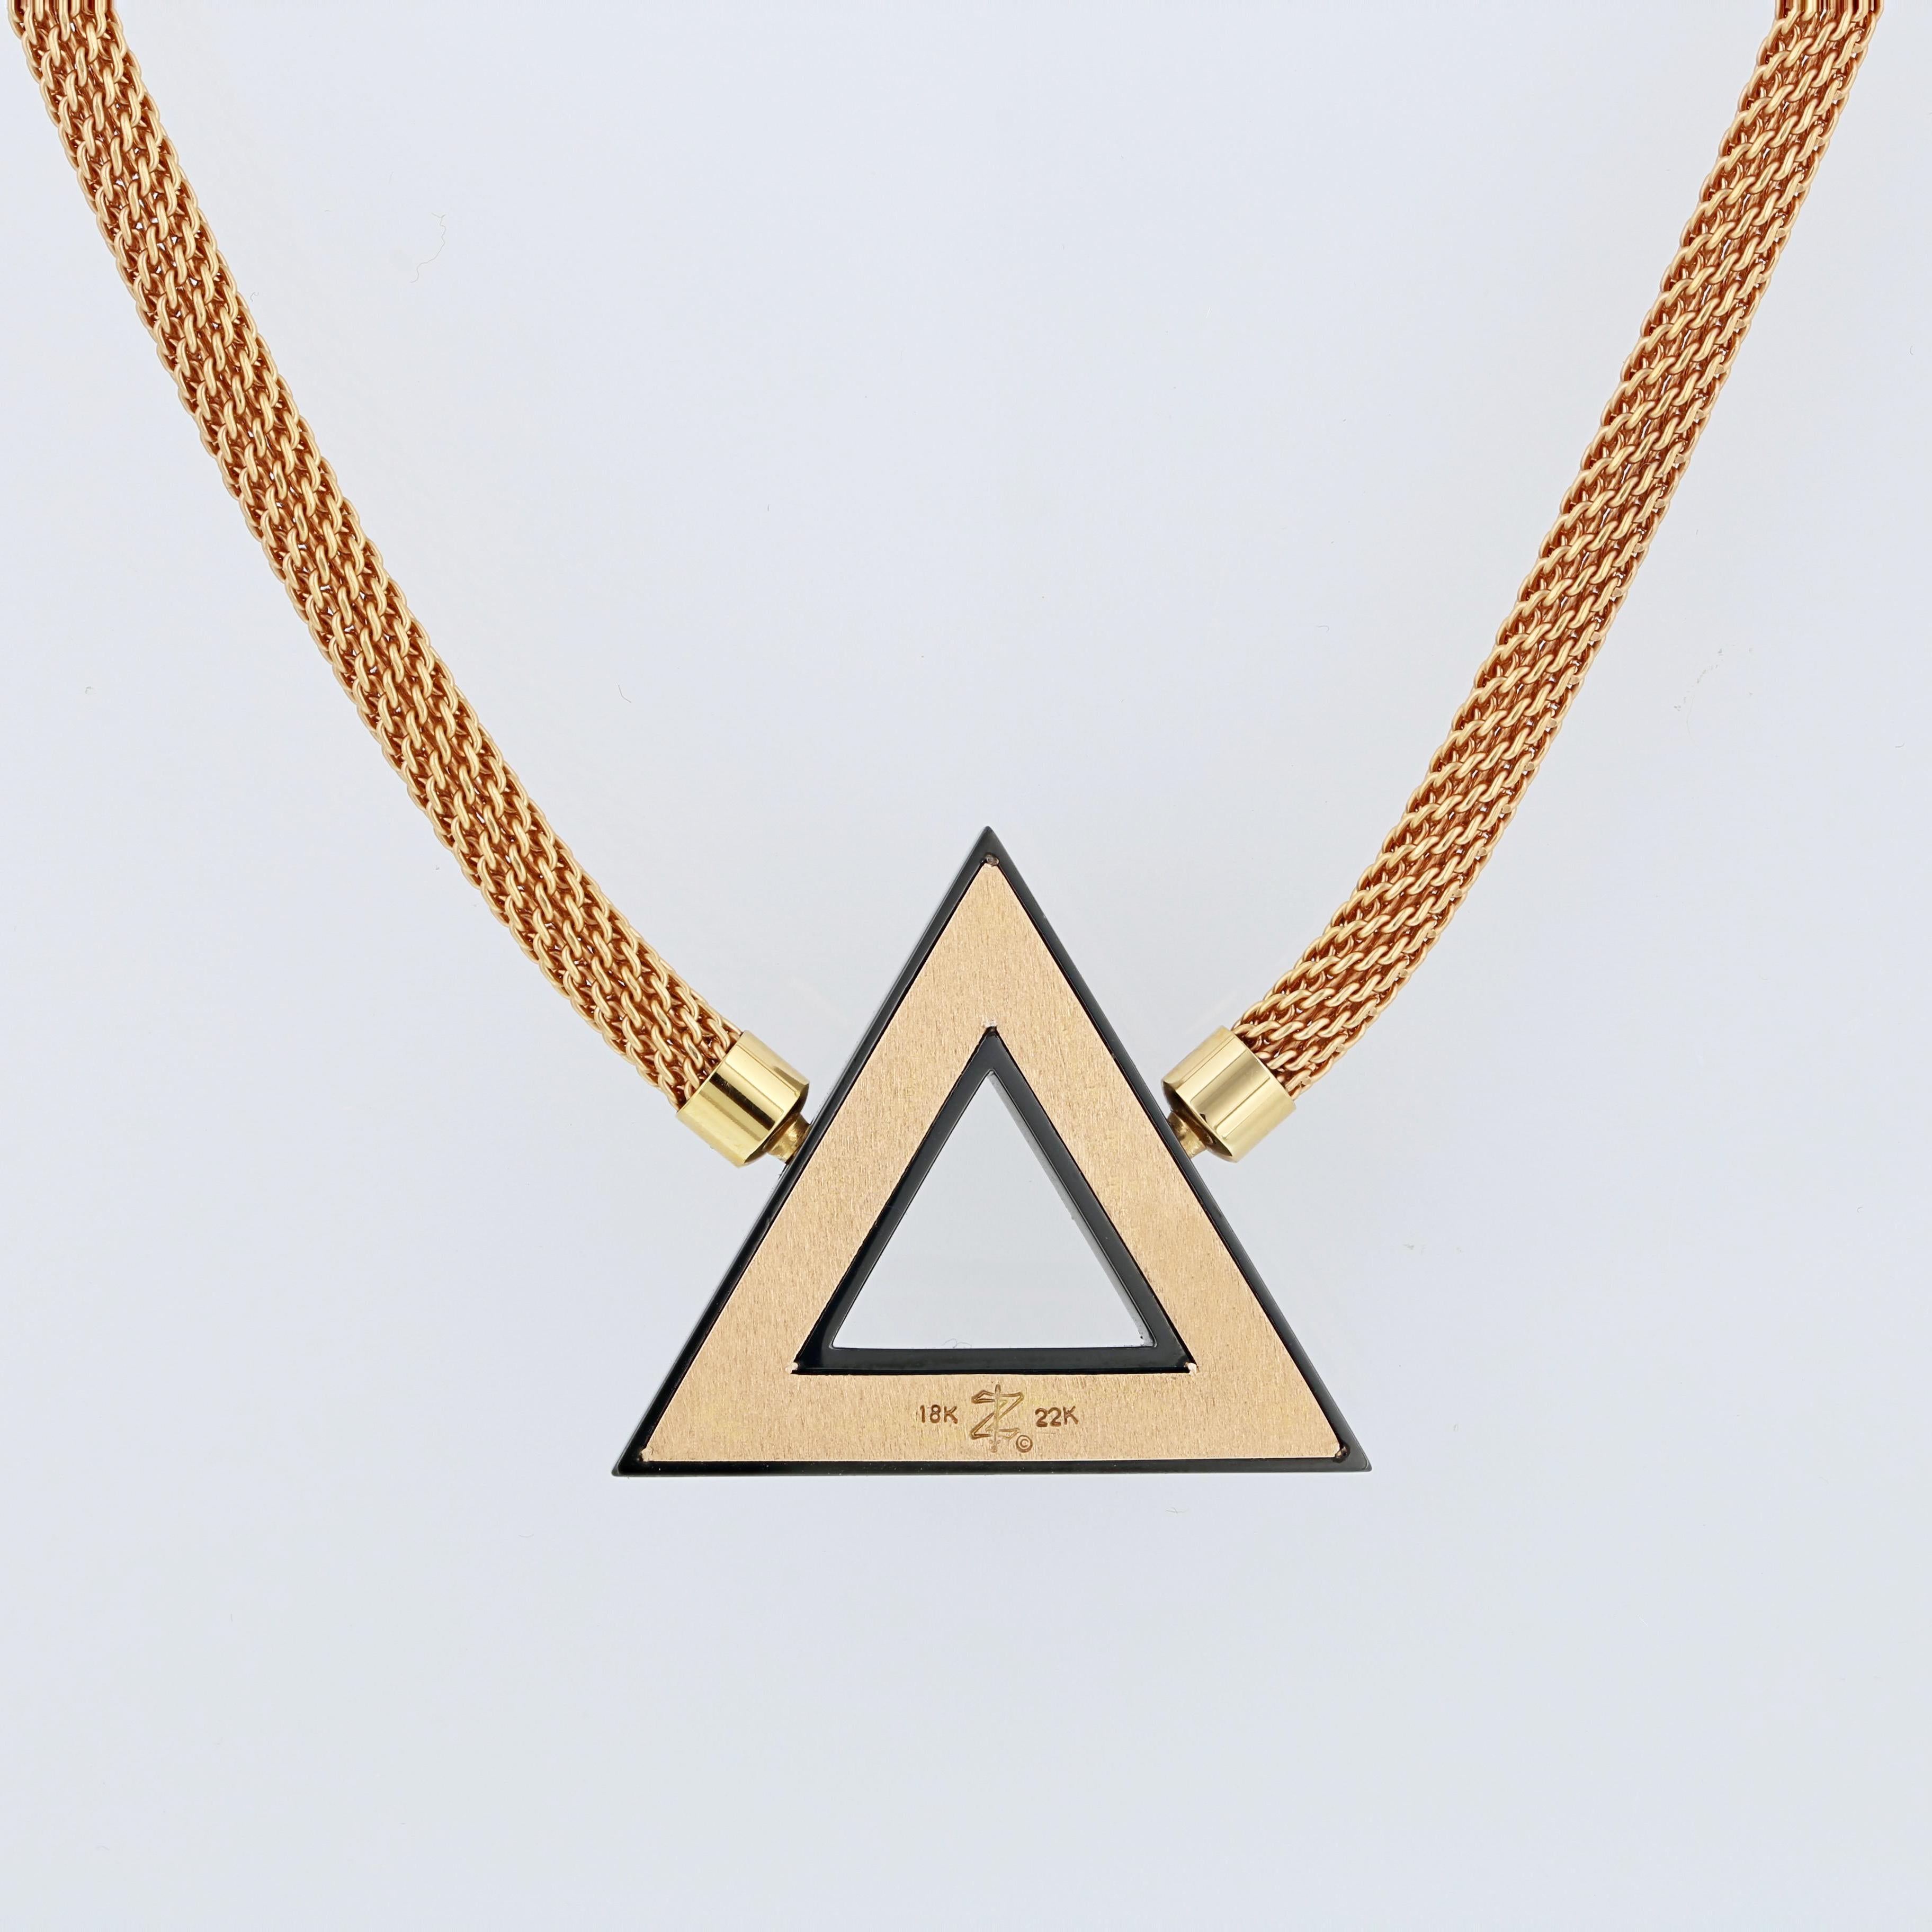 Art Deco Geometric Pyramid Shaped Rose Gold Inlaid Pendant by Zoltan David For Sale